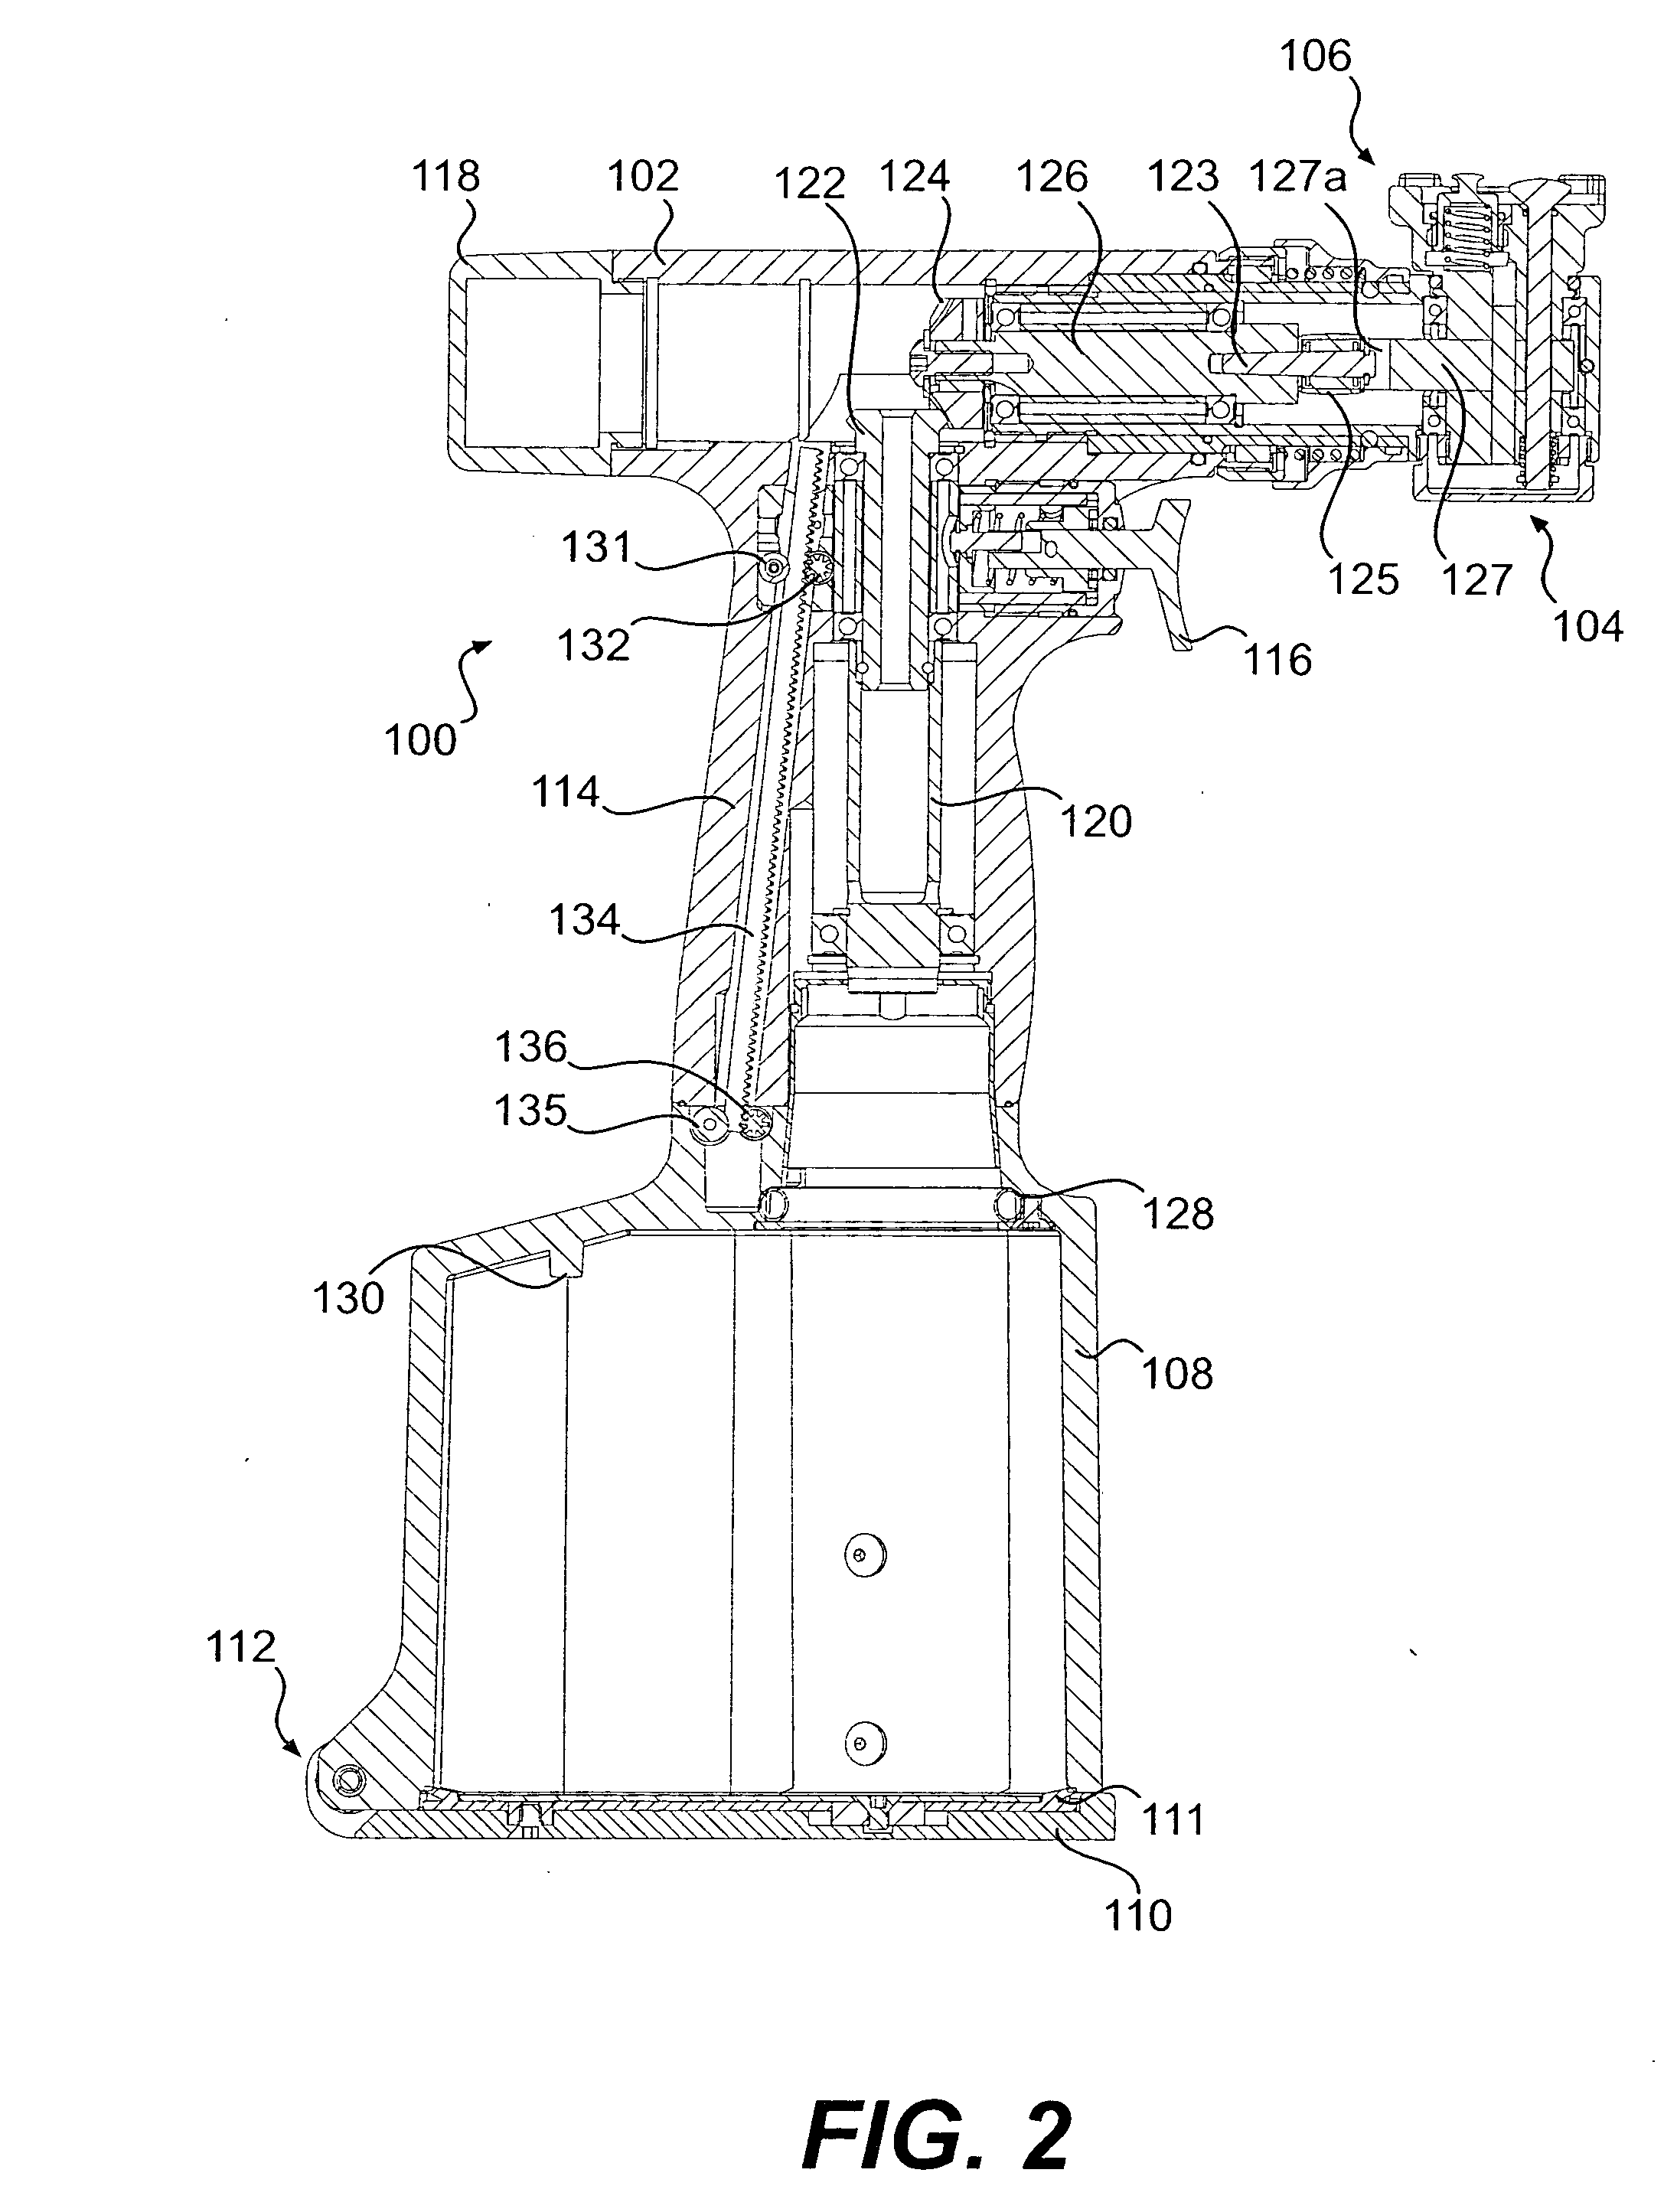 Surgical apparatus and tools for same